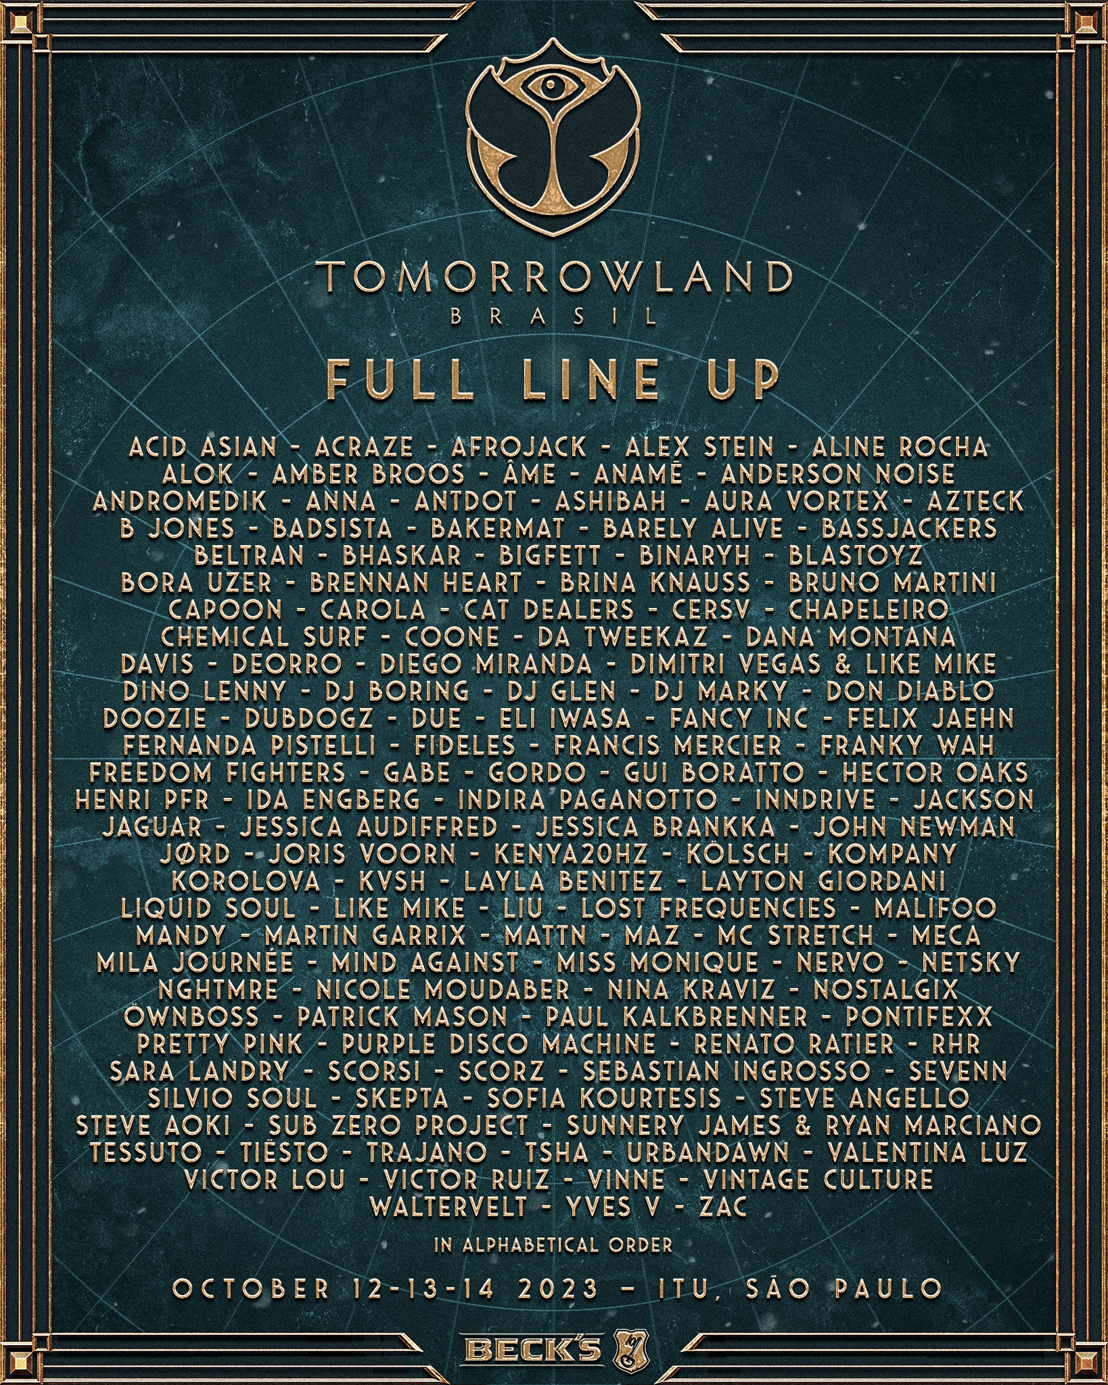 Tomorrowland Brasil unveils the full line-up with only 50 days left 